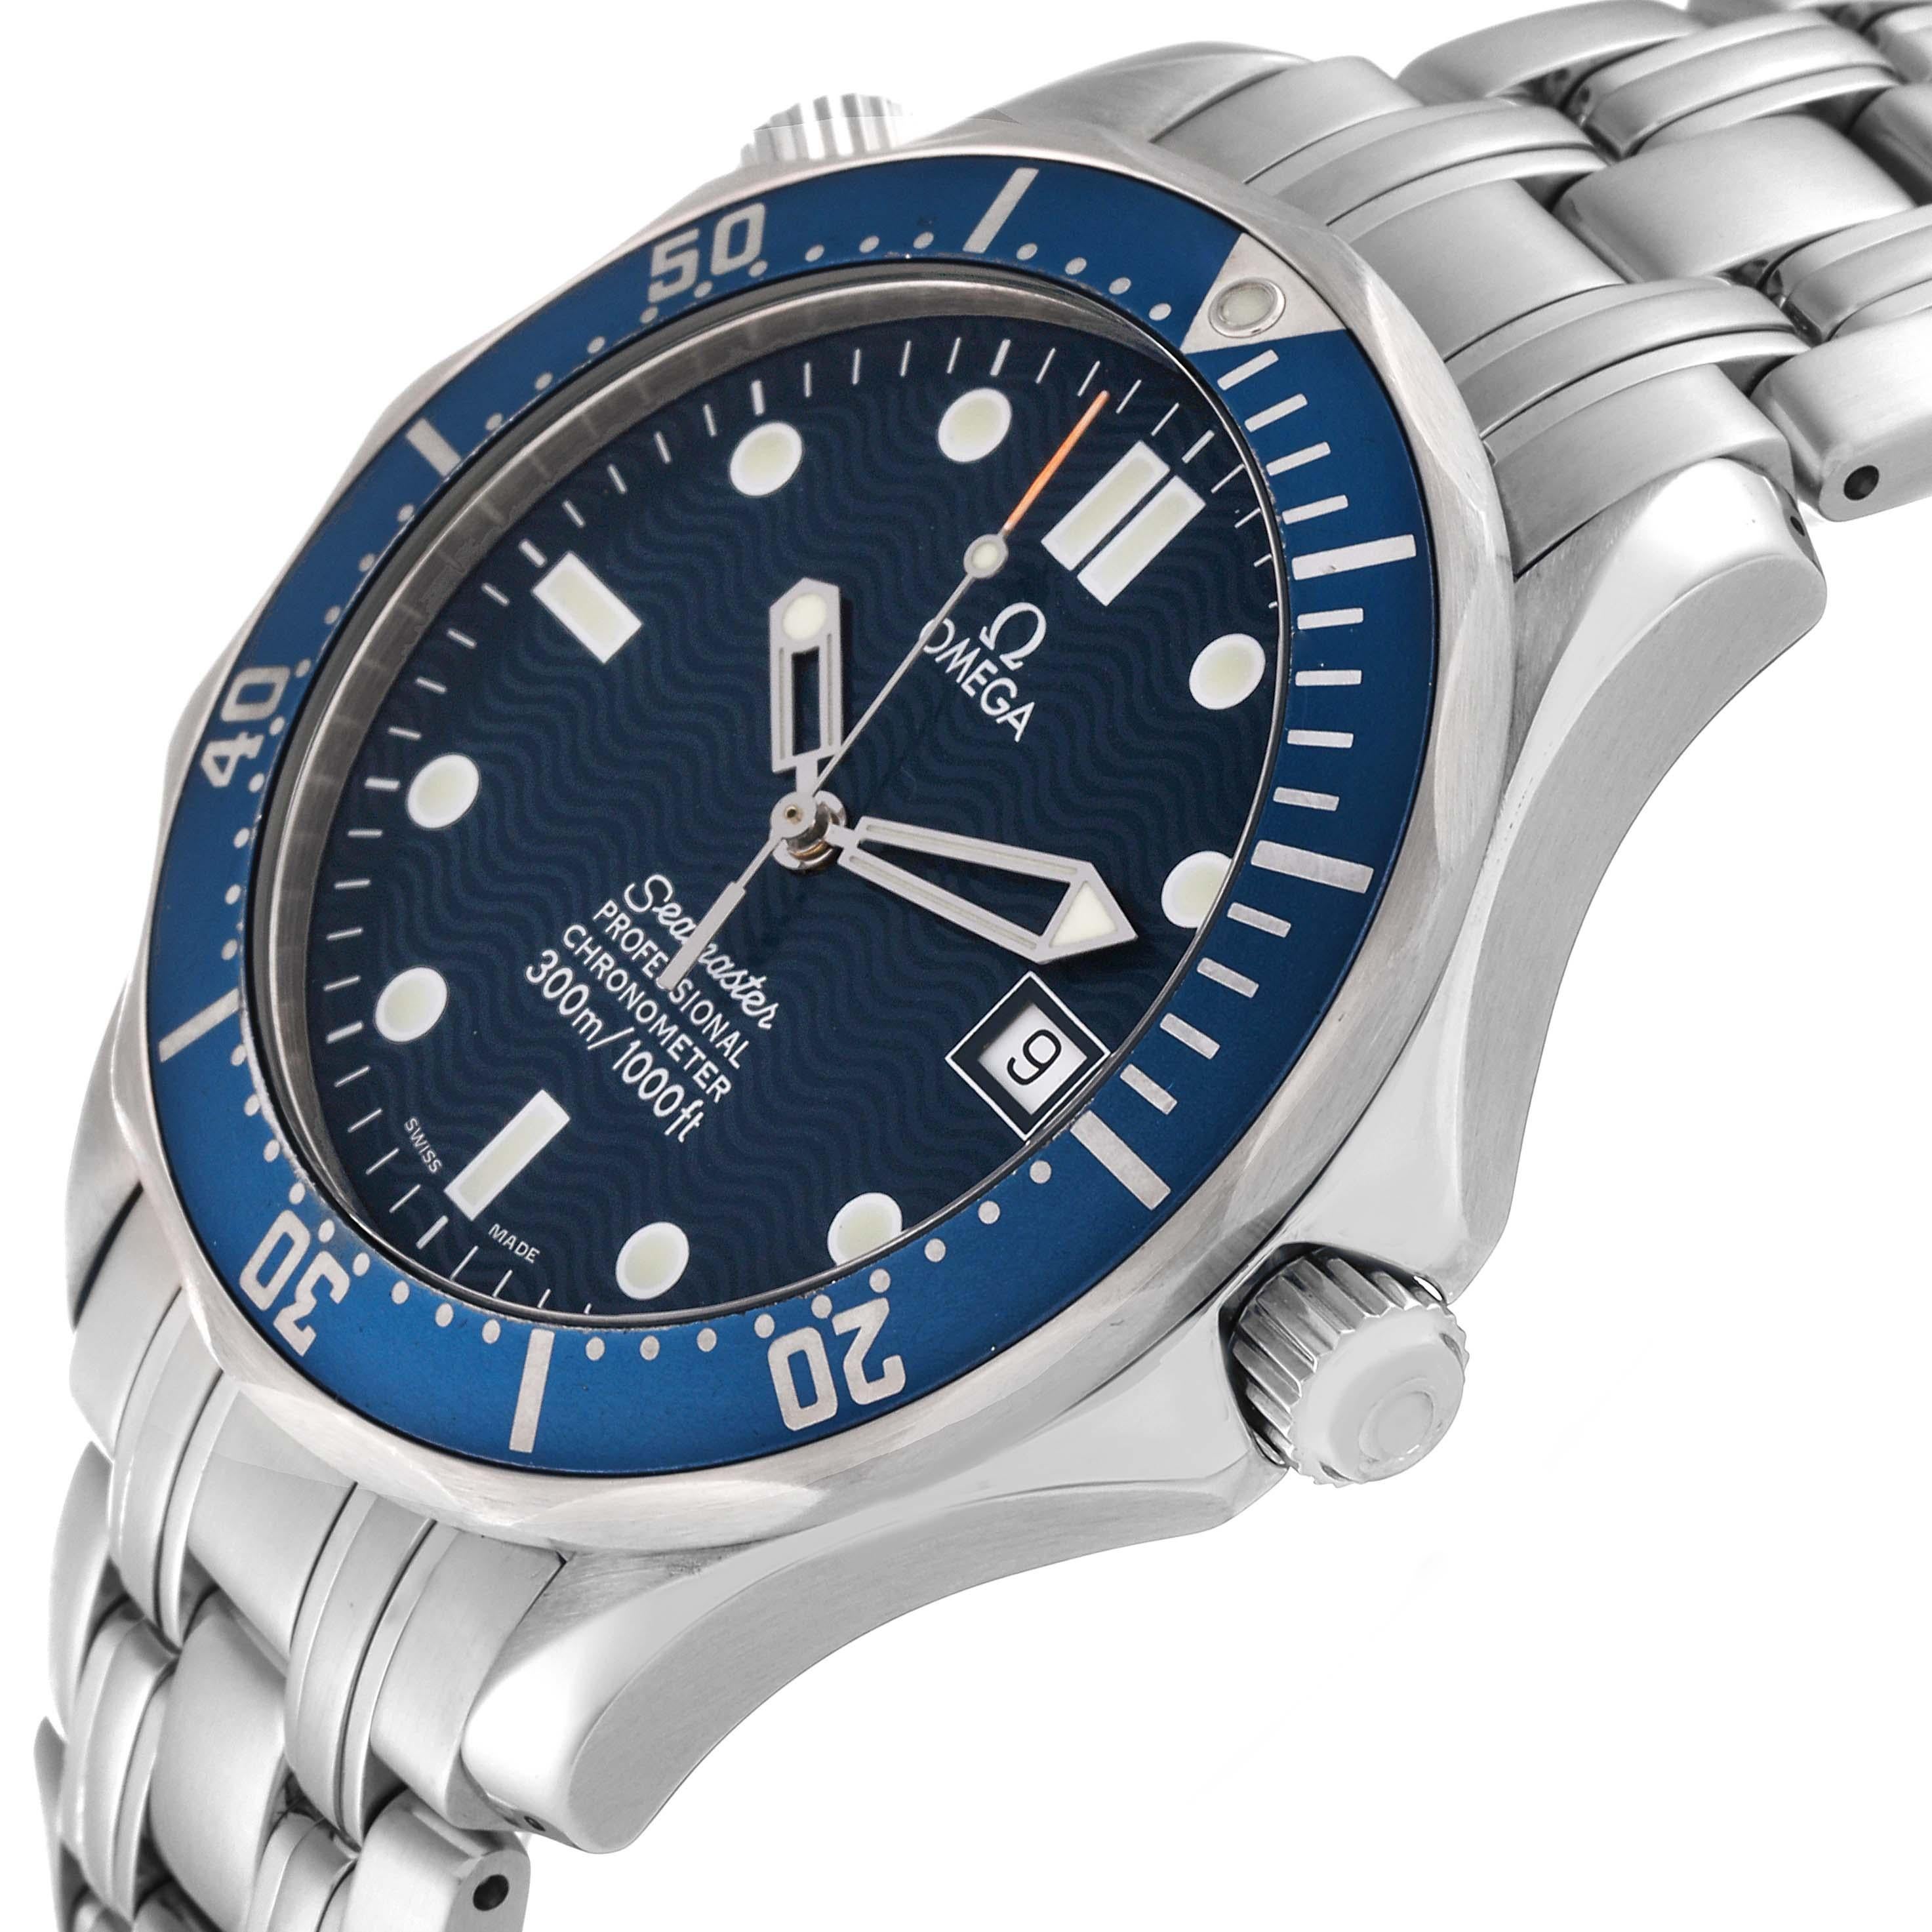 Omega Seamaster Diver 300M Blue Dial Steel Mens Watch 2531.80.00 Card. Automatic self-winding movement. Stainless steel case 41.0 mm in diameter. Omega logo on the crown. Helium escape valve at 10 o'clock. Blue unidirectional rotating bezel. Scratch